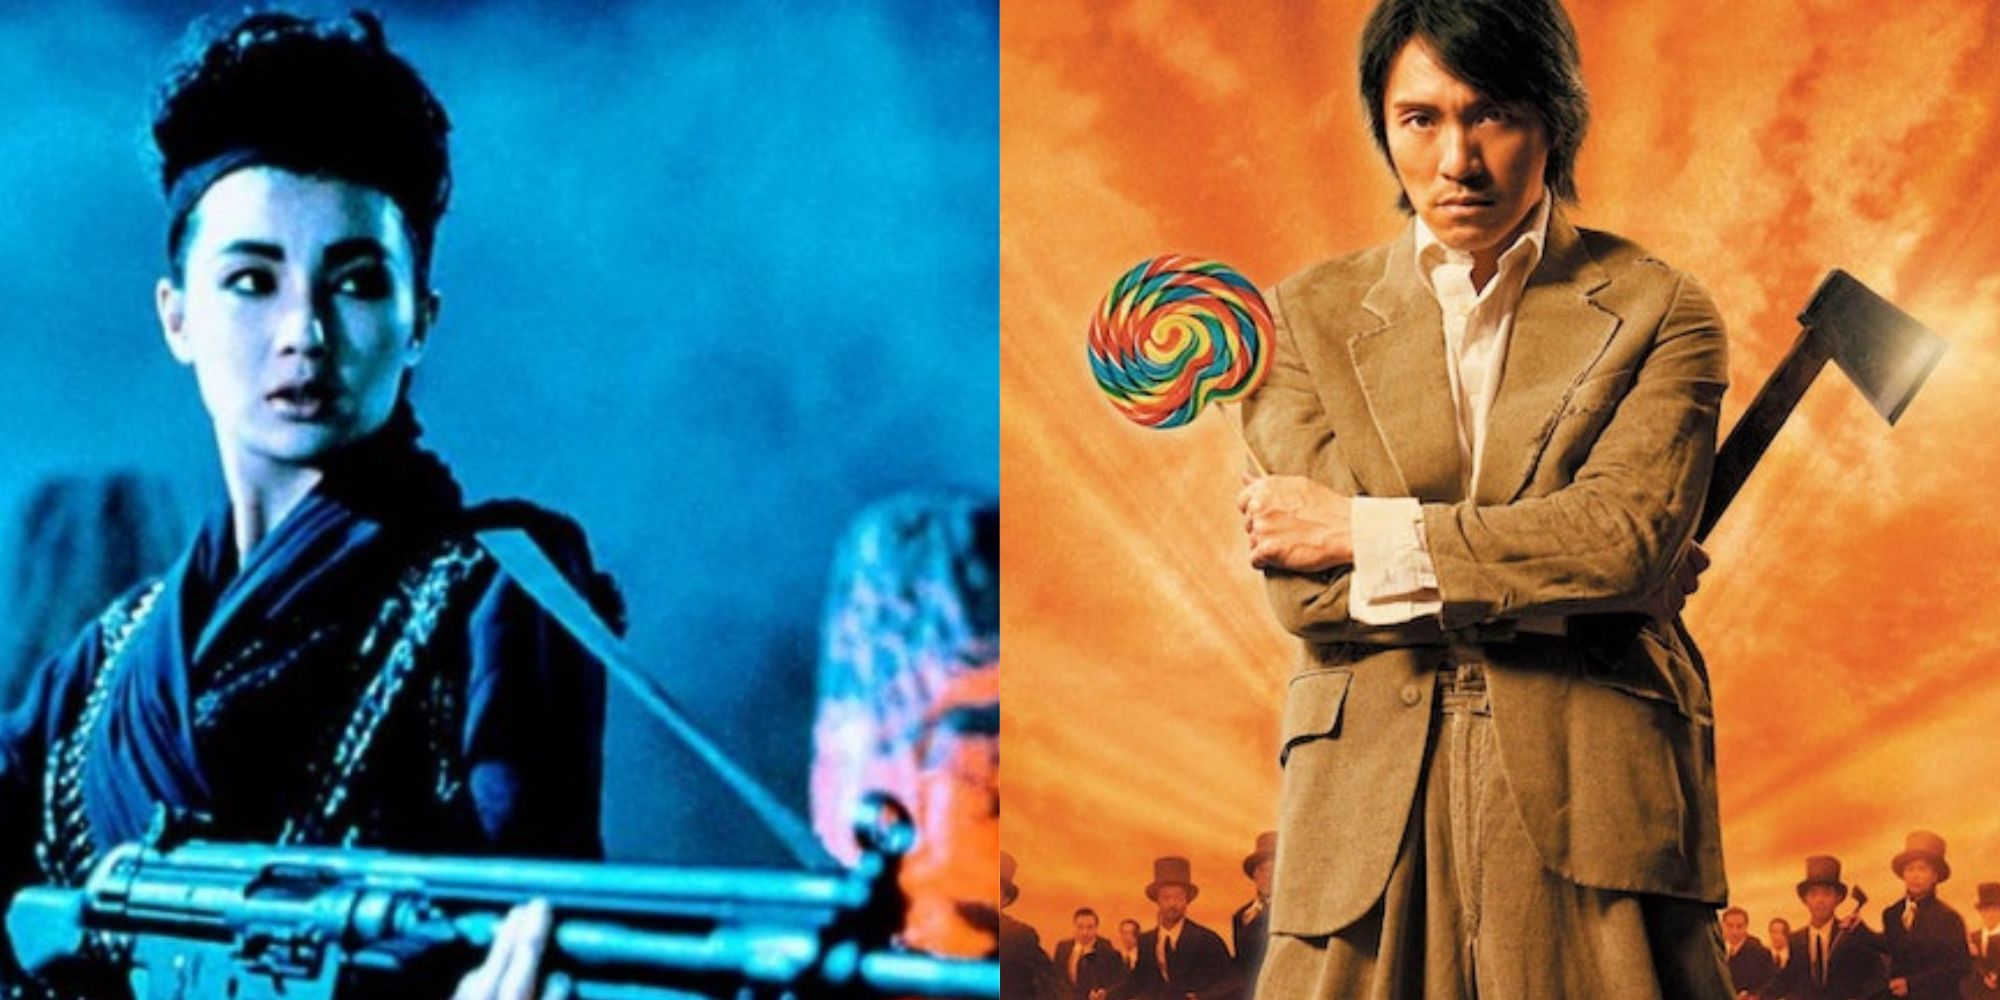 Still images of The Heroic Trio (1993) on the left and Kung Fu Hustle (2004) on the right